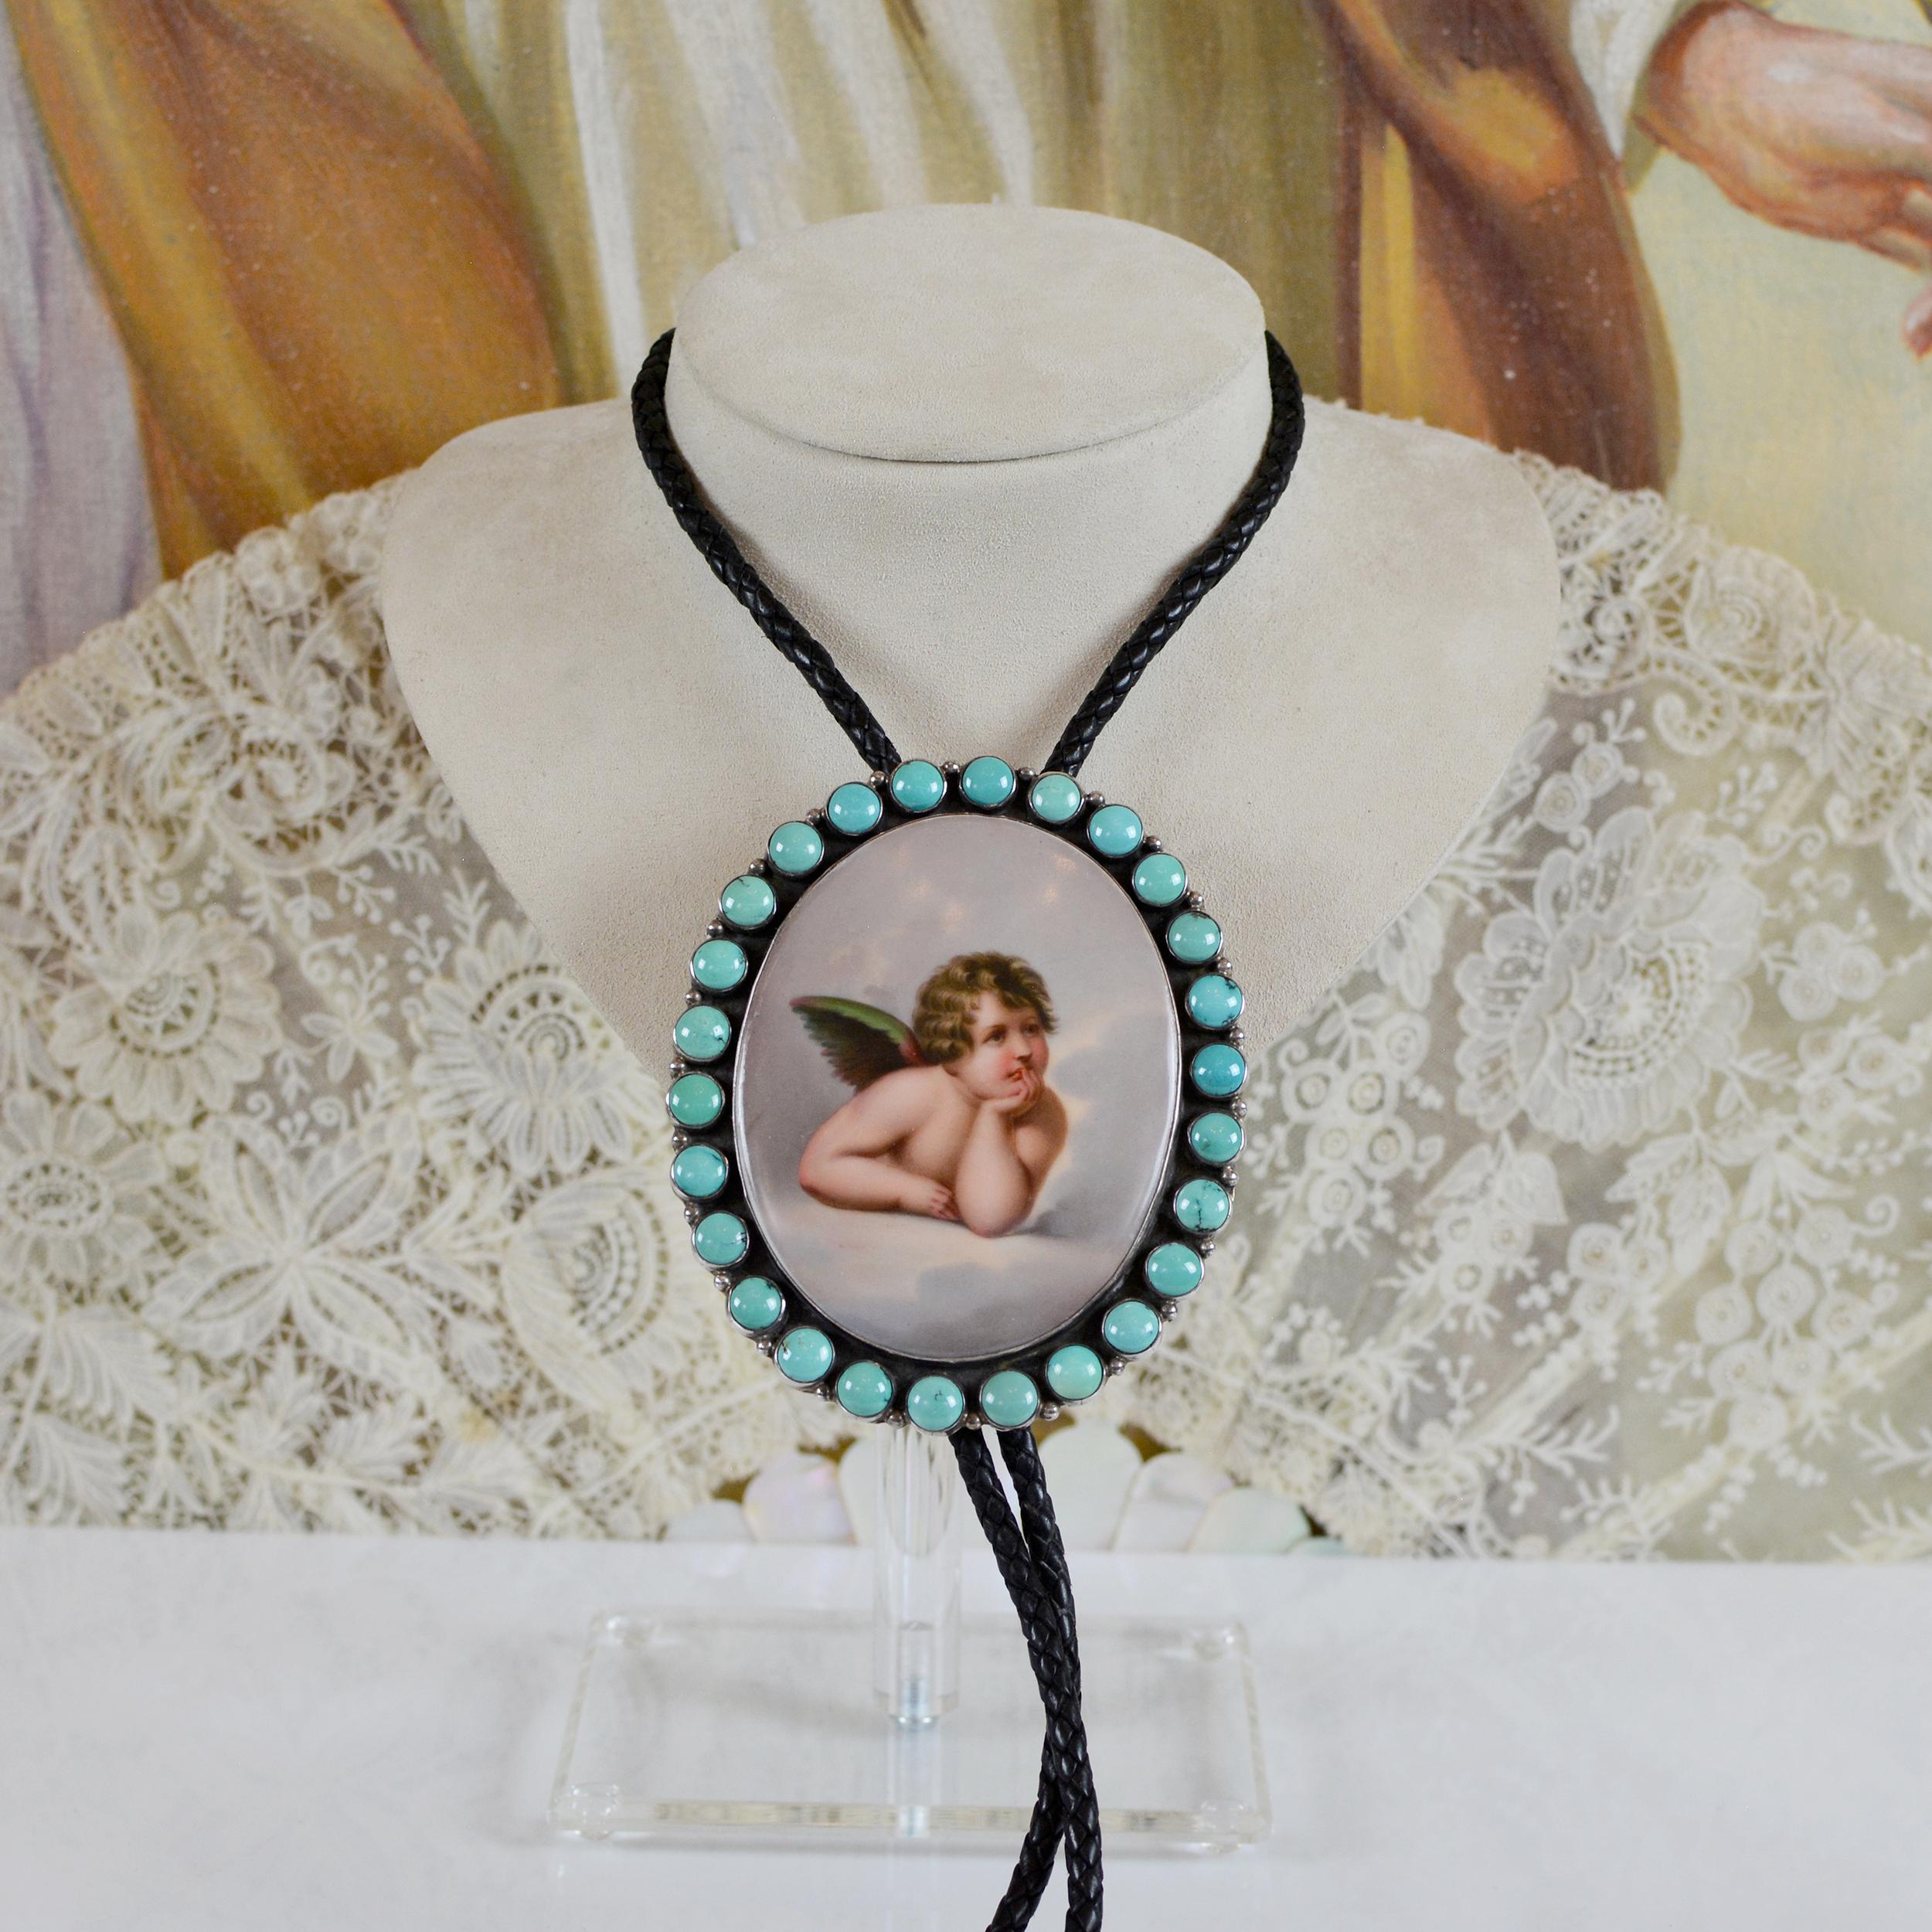 With a visionary approach to the classic, Western bolo, Jill Garber has designed this poetic piece around a 19th century hand-painted angel portrait on porcelain. The Sistine Madonna, also called The Madonna di San Sisto, is an oil painting by the